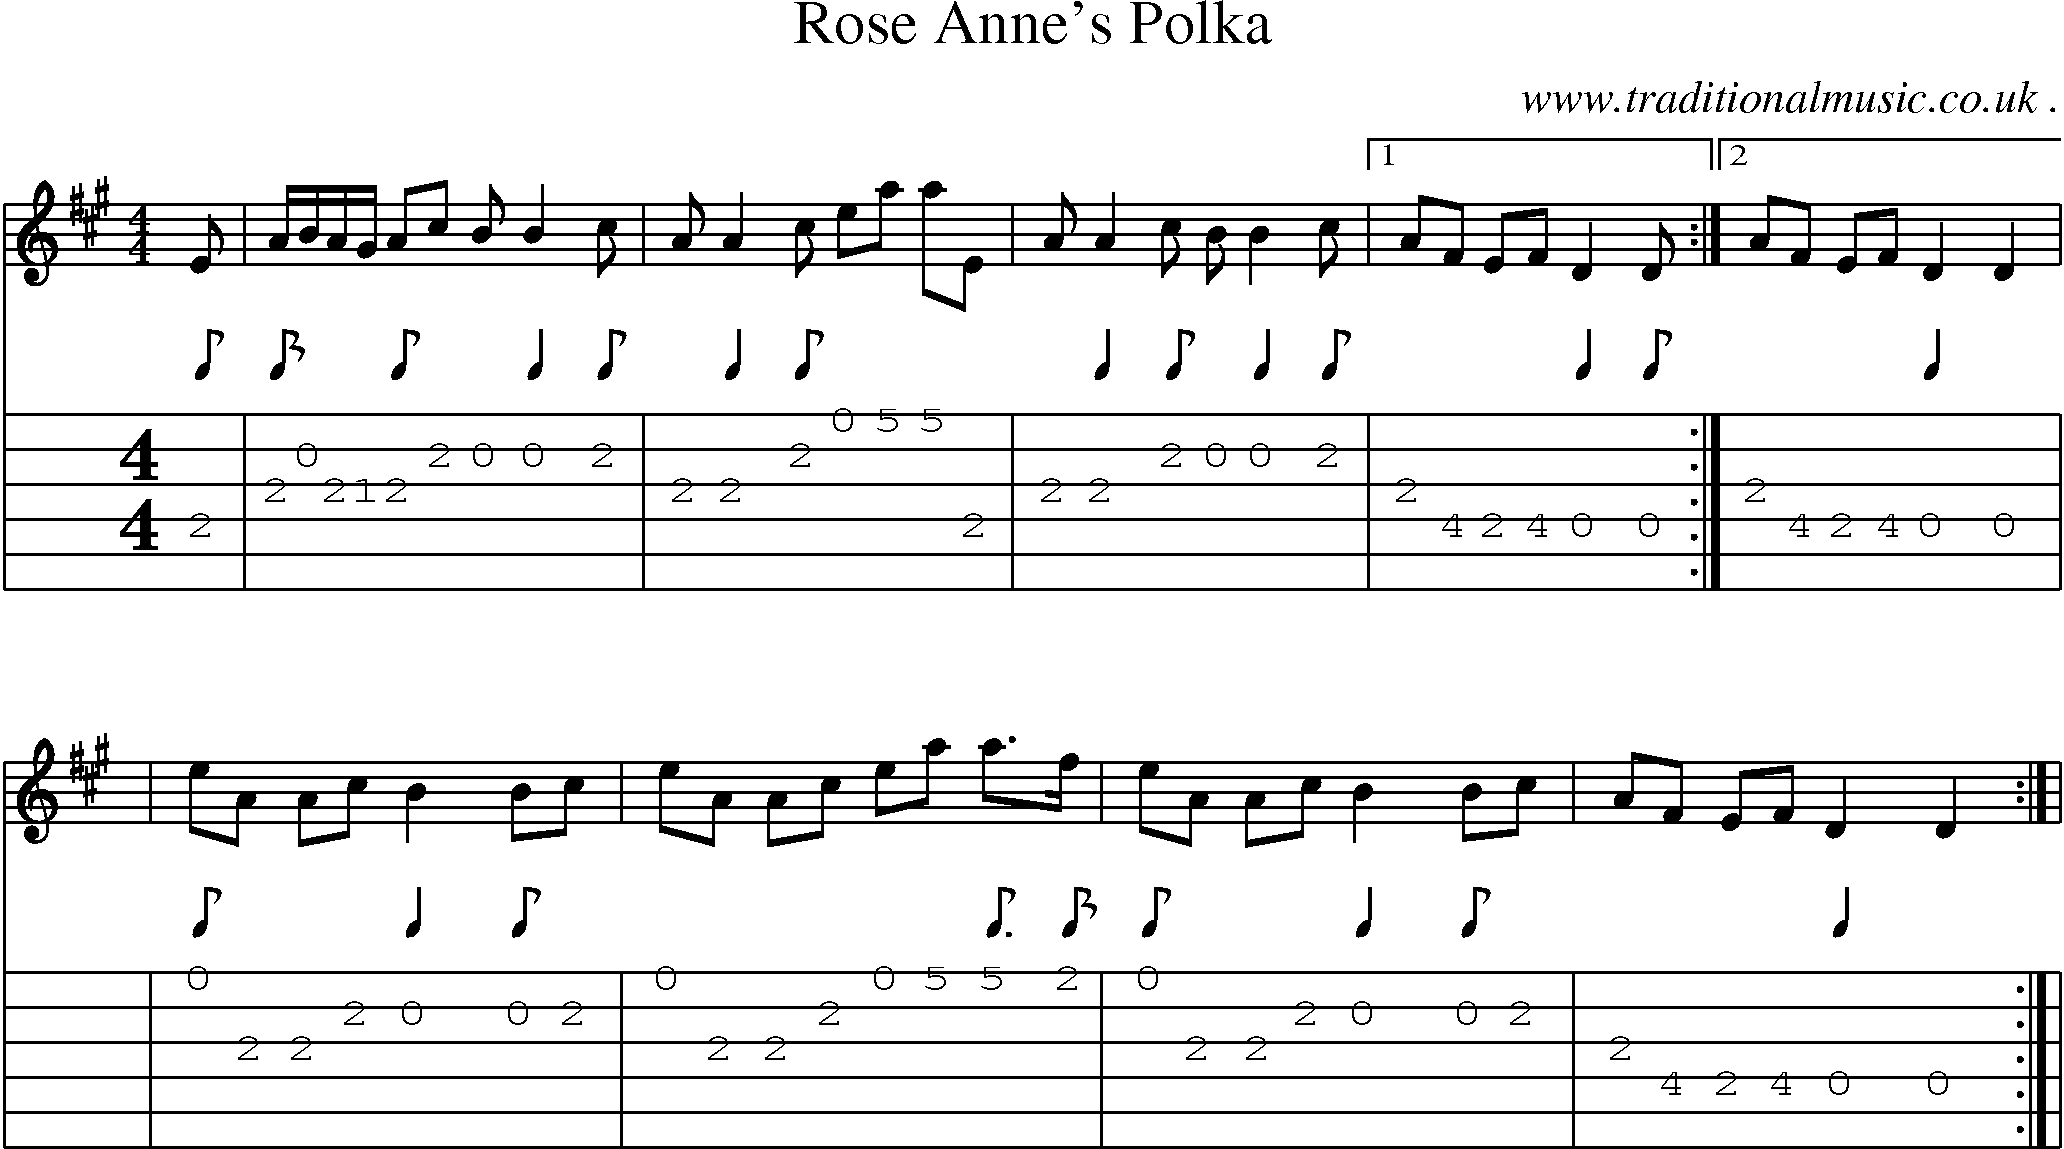 Sheet-Music and Guitar Tabs for Rose Annes Polka